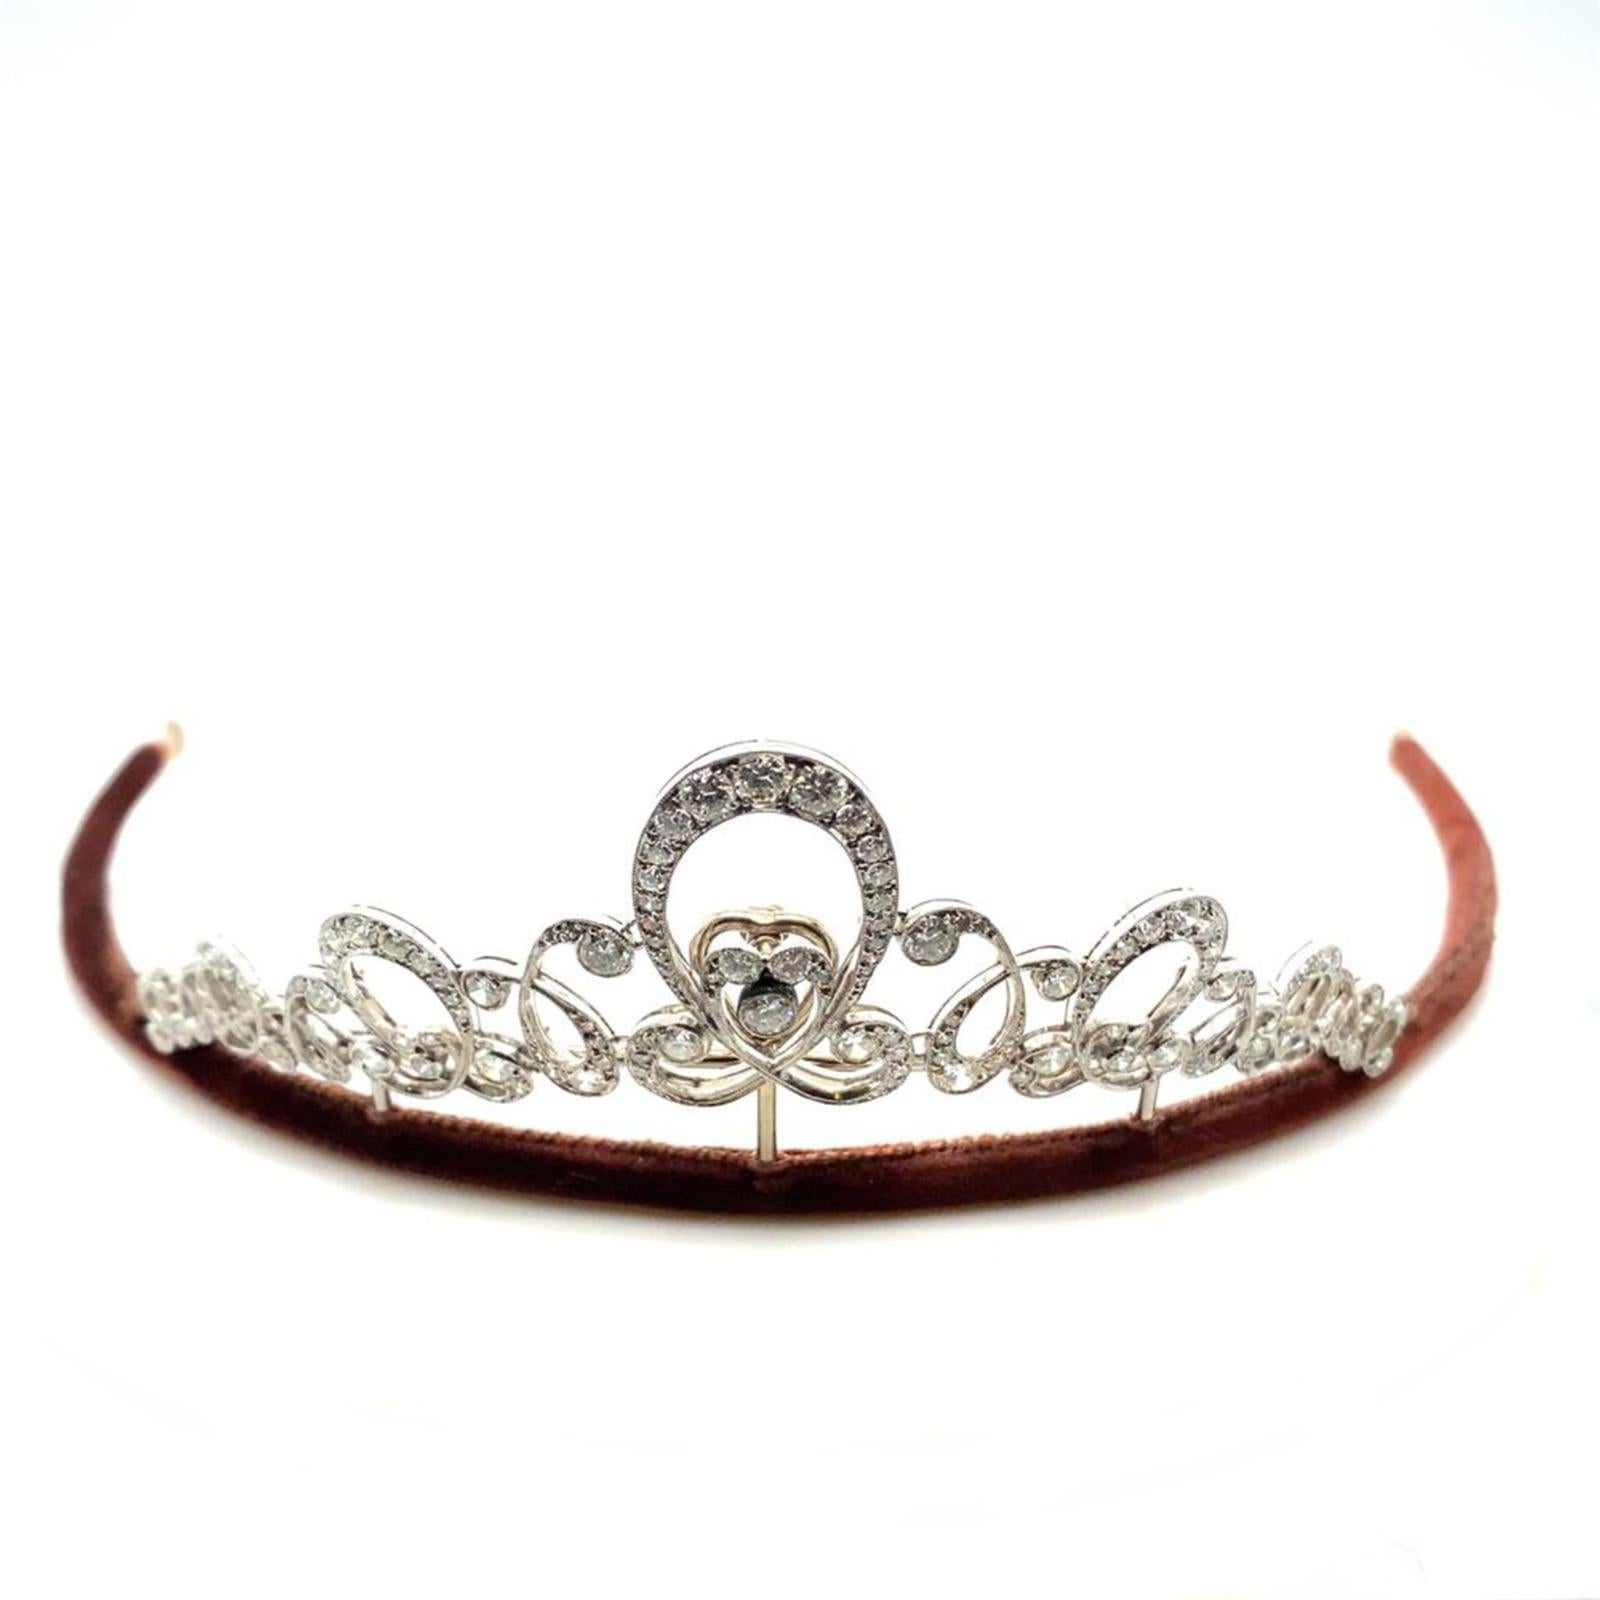 An A. Tillander diamond platinum tiara, circa 1910.

This exceptional diamond tiara by A. Tillander is beautifully handcrafted in platinum.

The tiara is composed of intertwining, scrolled sections grain and bezel set with transitional and eight cut